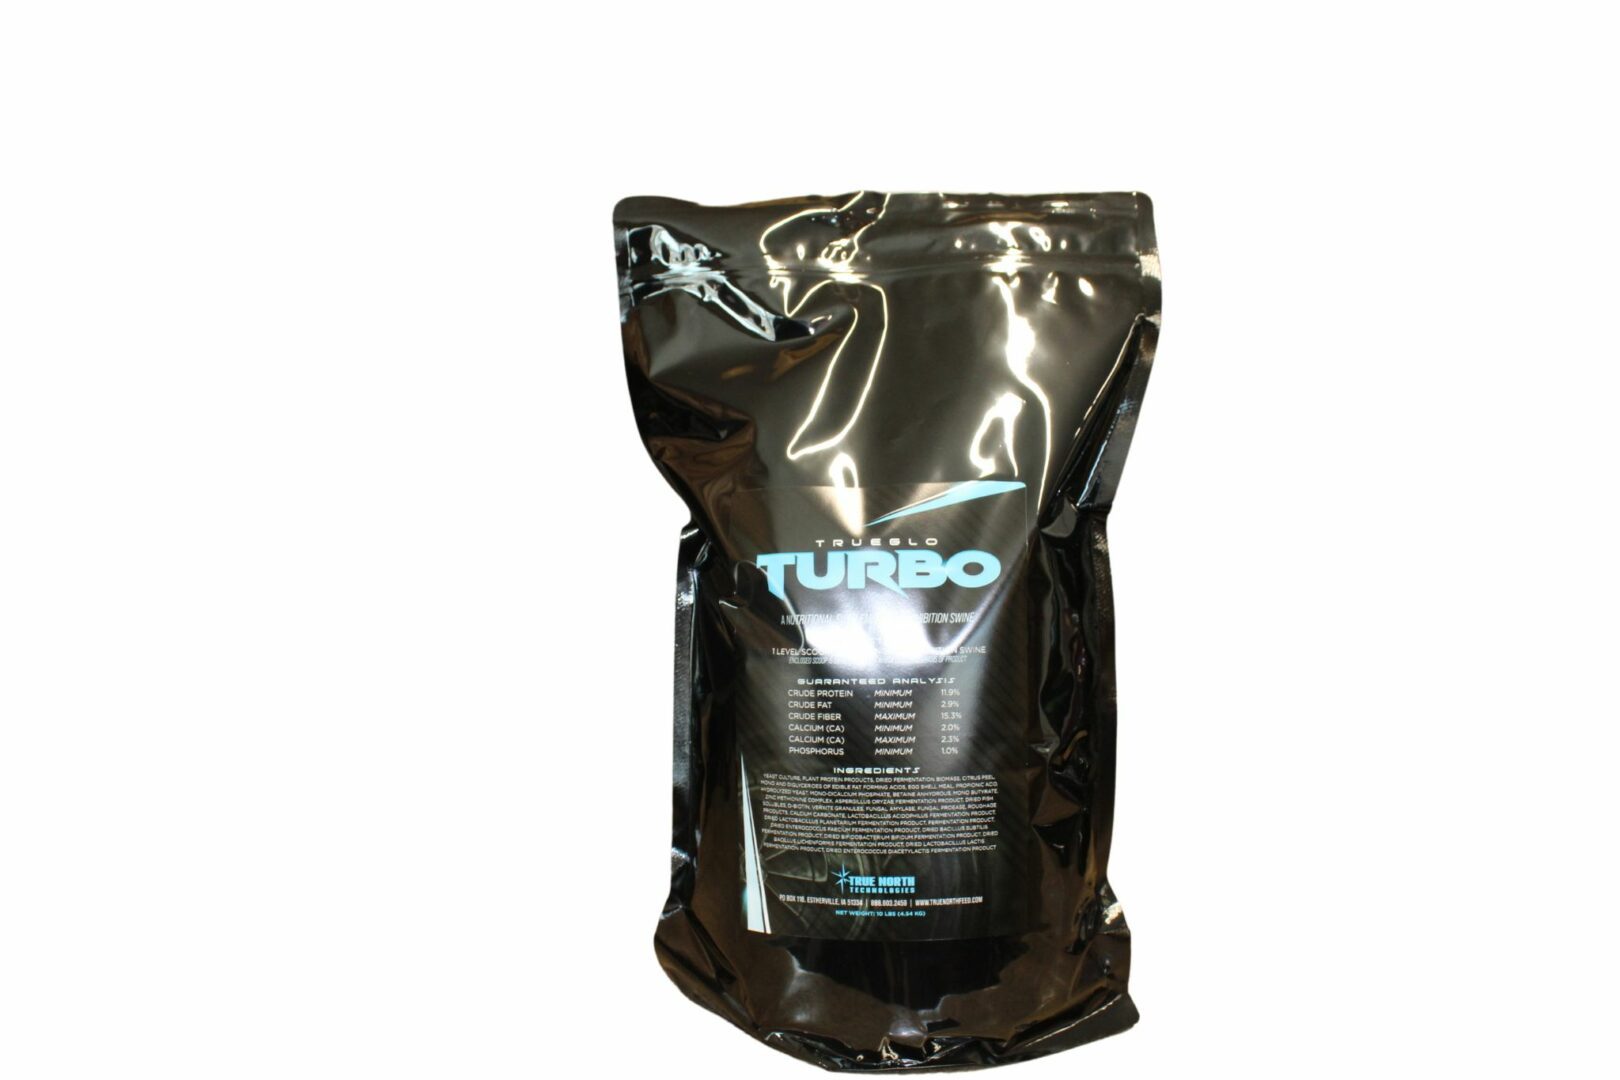 TrueGlo Turbo supports appetite, stomach health, gut health, skin, and hair through science. All the benefits of original Trueglo with a turbo boost.